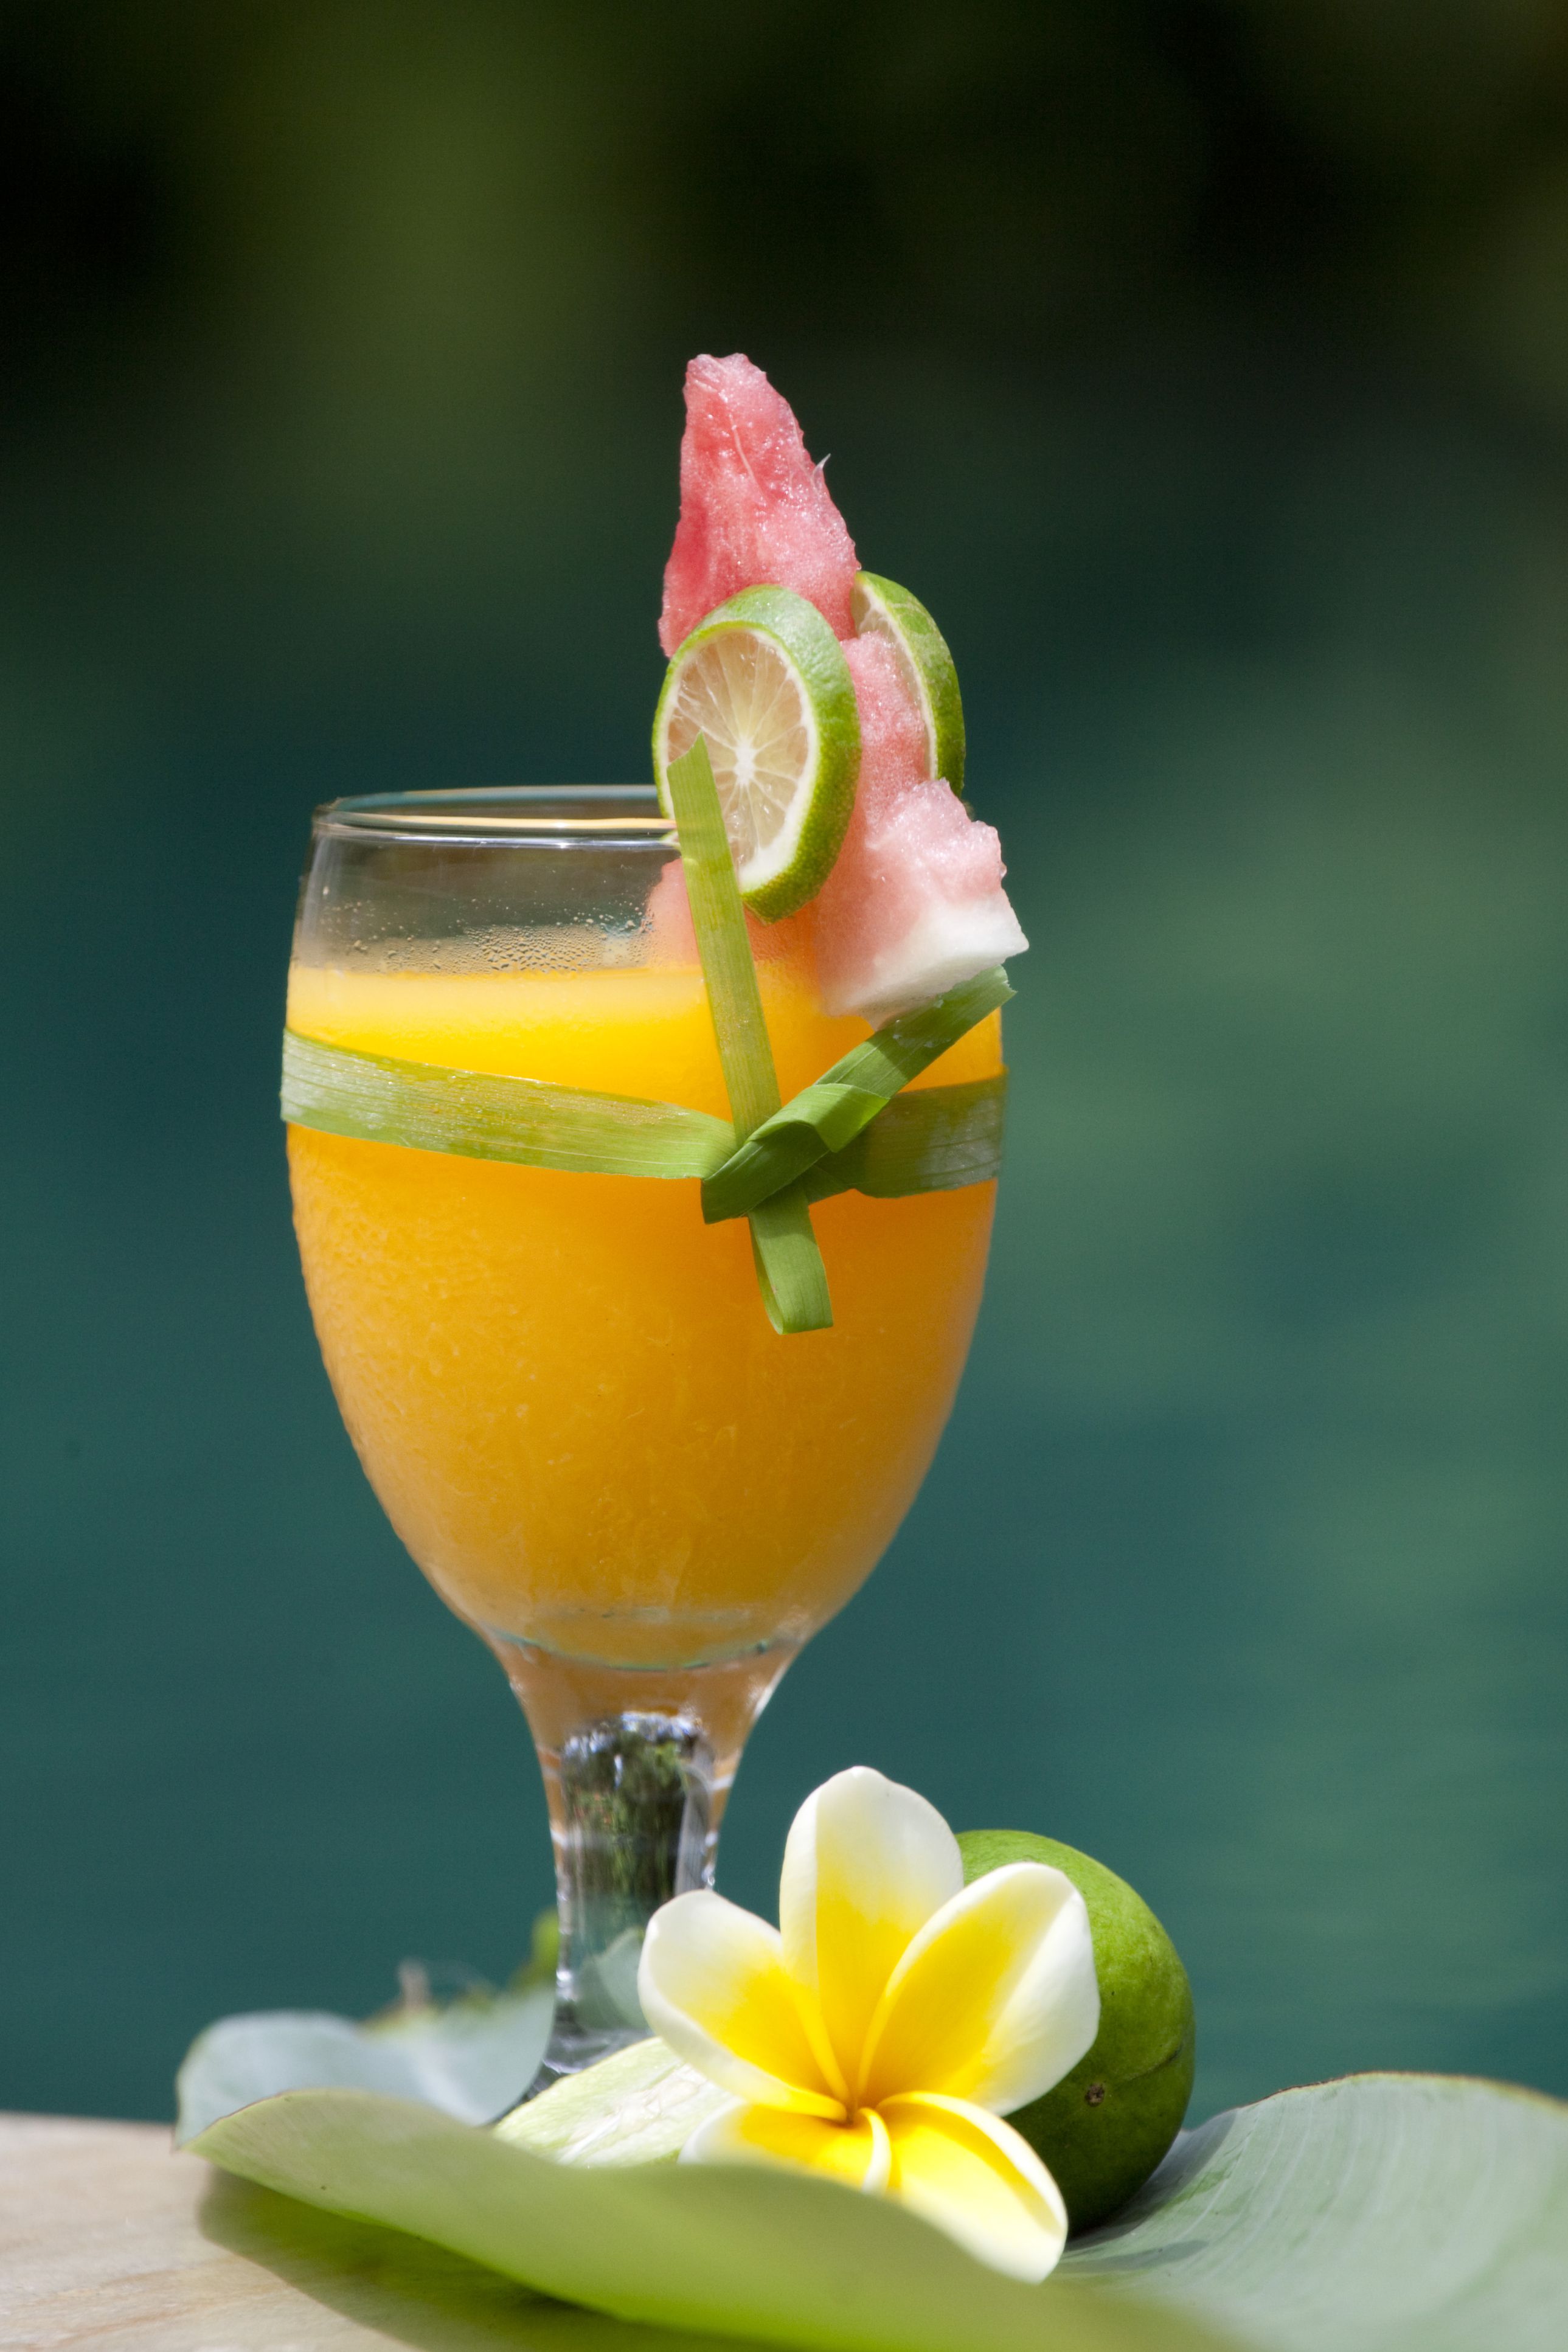 Mango Juice Recipes to Fight Cancer and Lose Weight